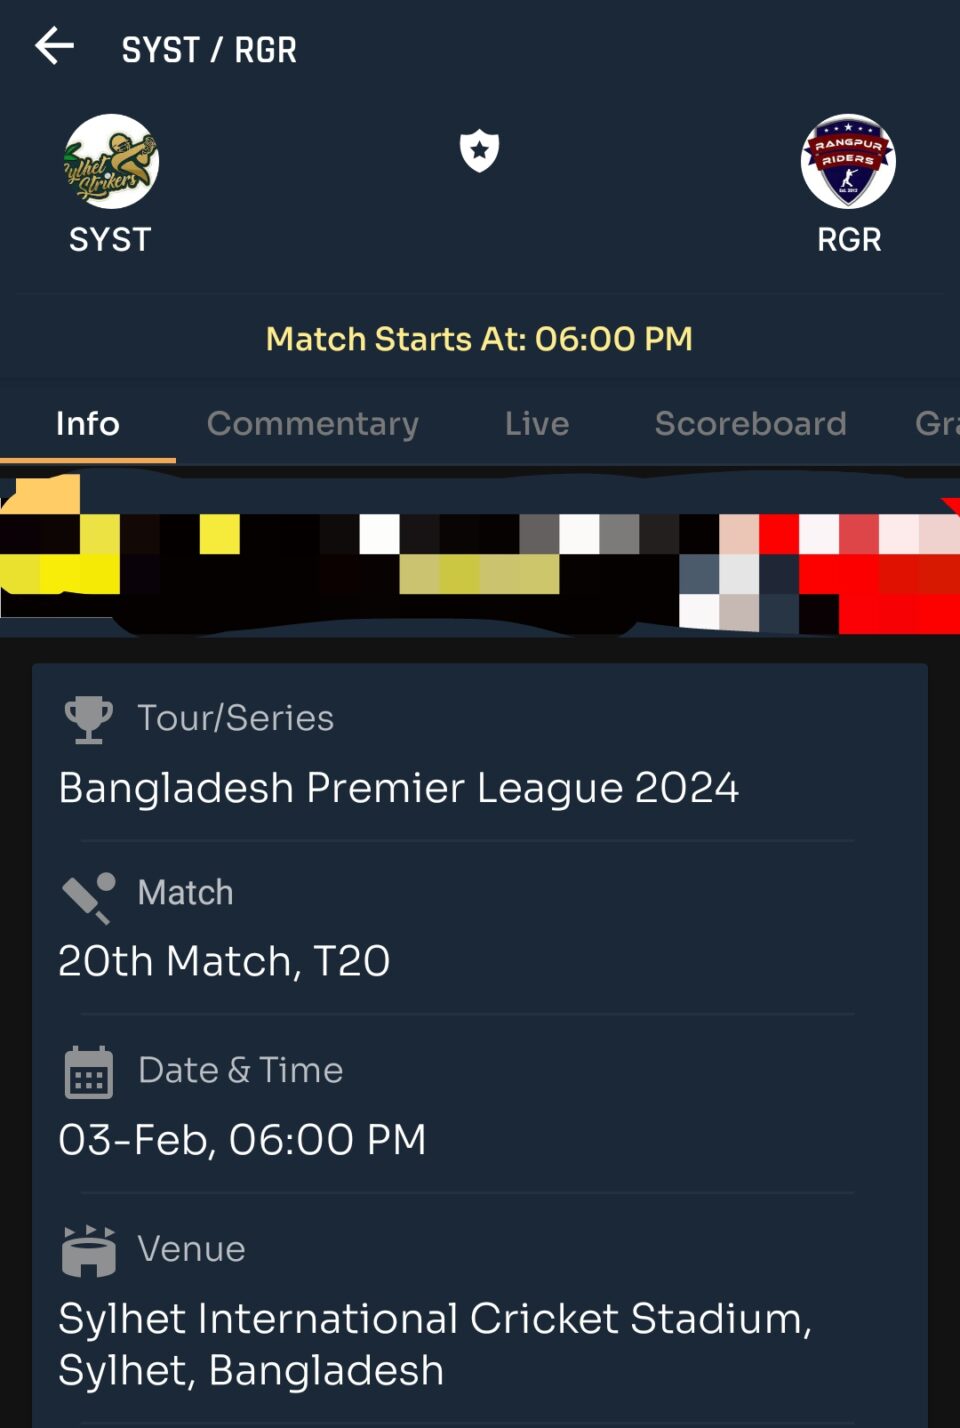 Today BPL Match Prediction |Match Number 20|SYST vs RGR | Toss and Match Analysis | Pitch & Weather Report